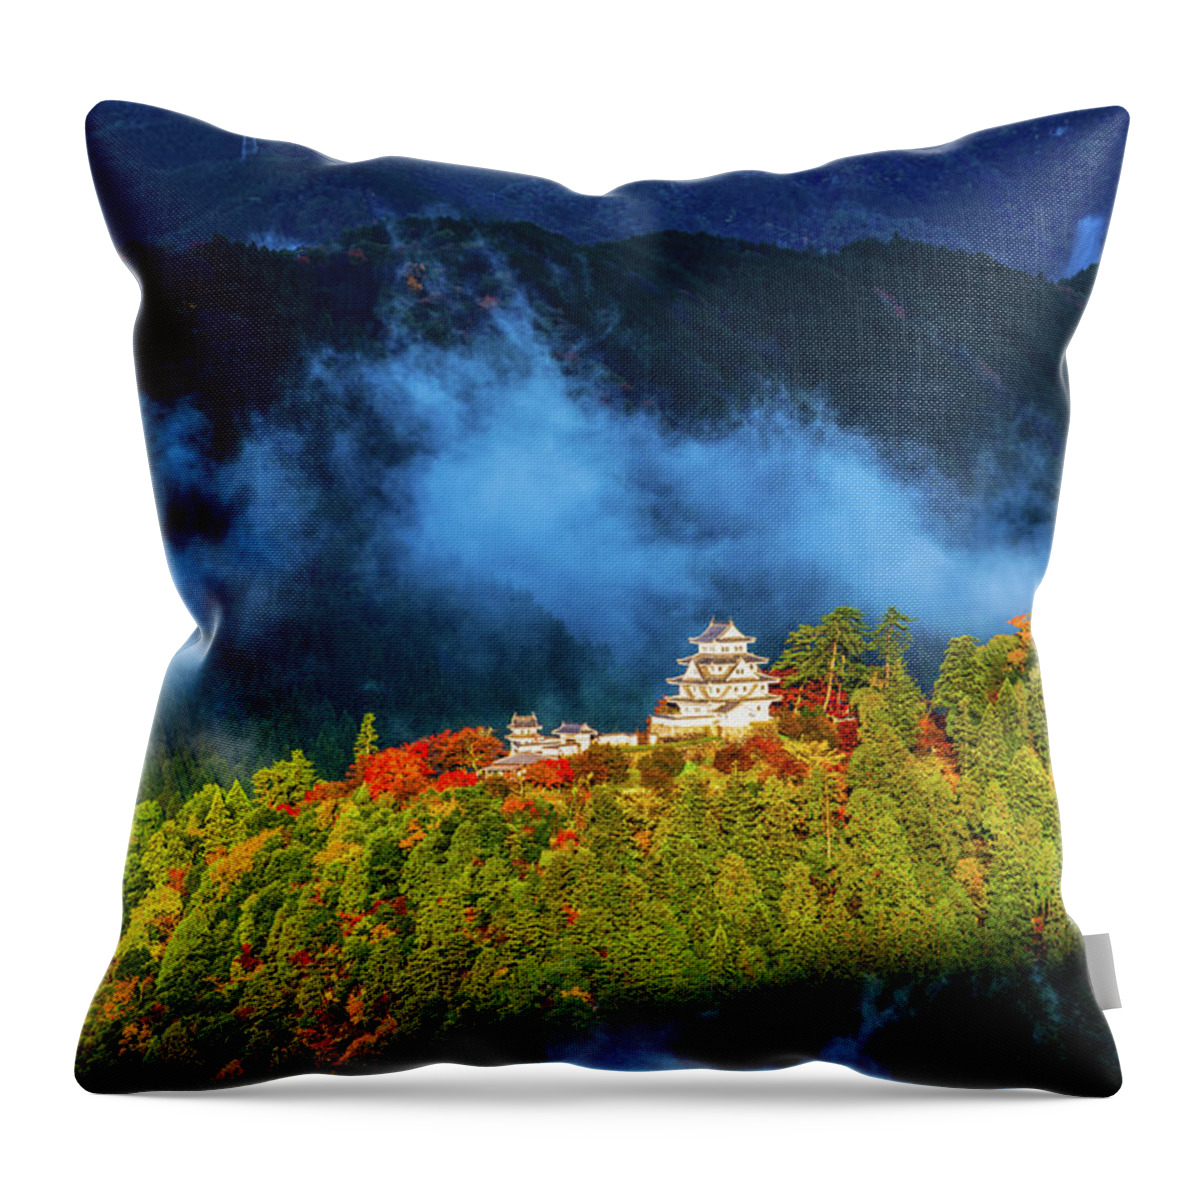 Landscape Throw Pillow featuring the photograph Gujyo Hachiman Castle #2 by Hisao Mogi